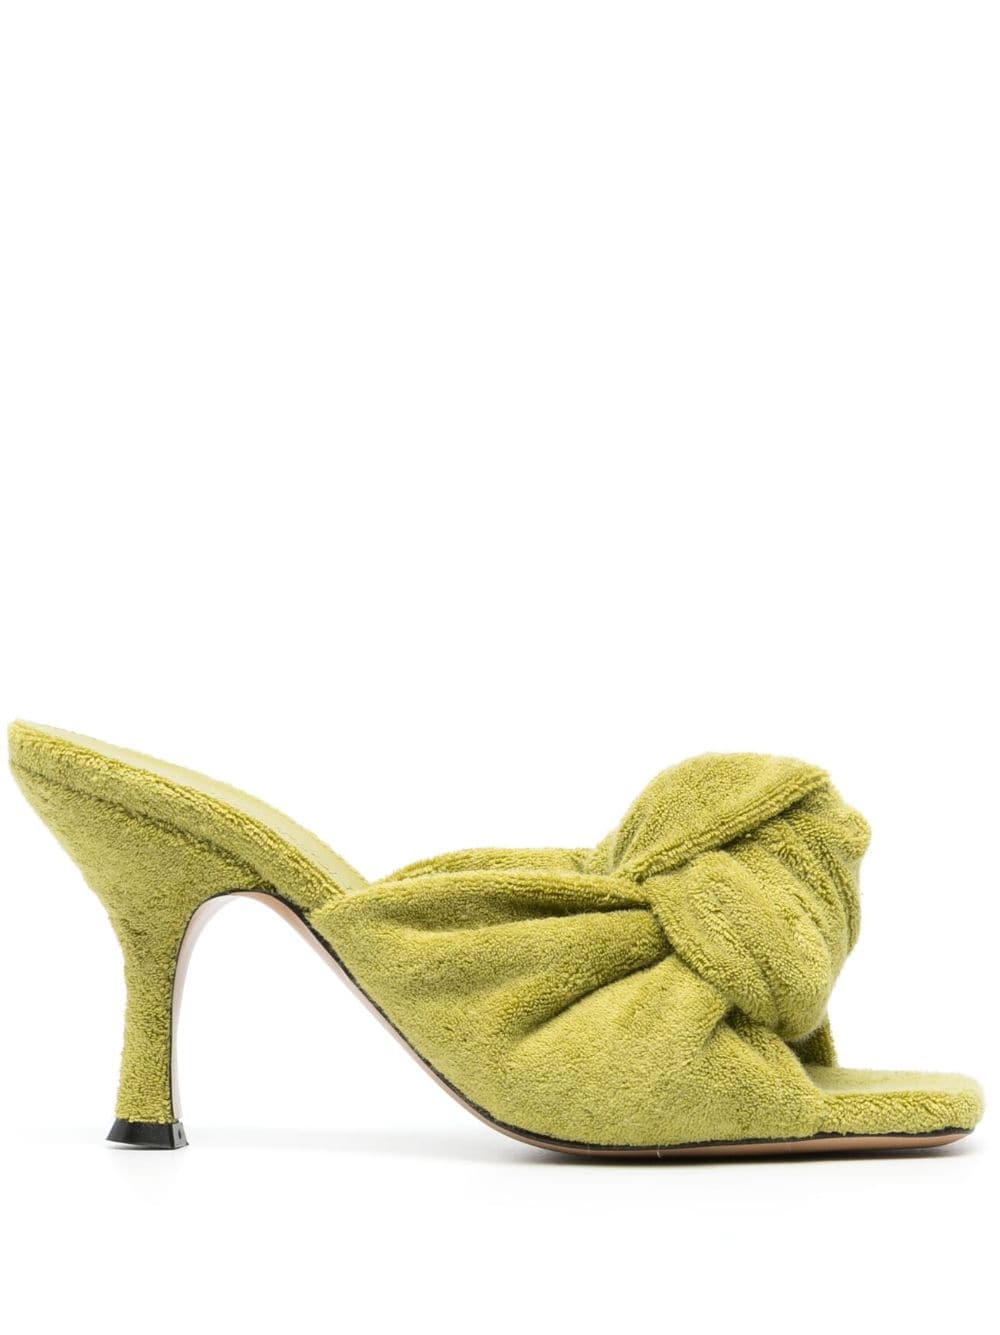 JW Anderson terrycloth open-toe mules - Green